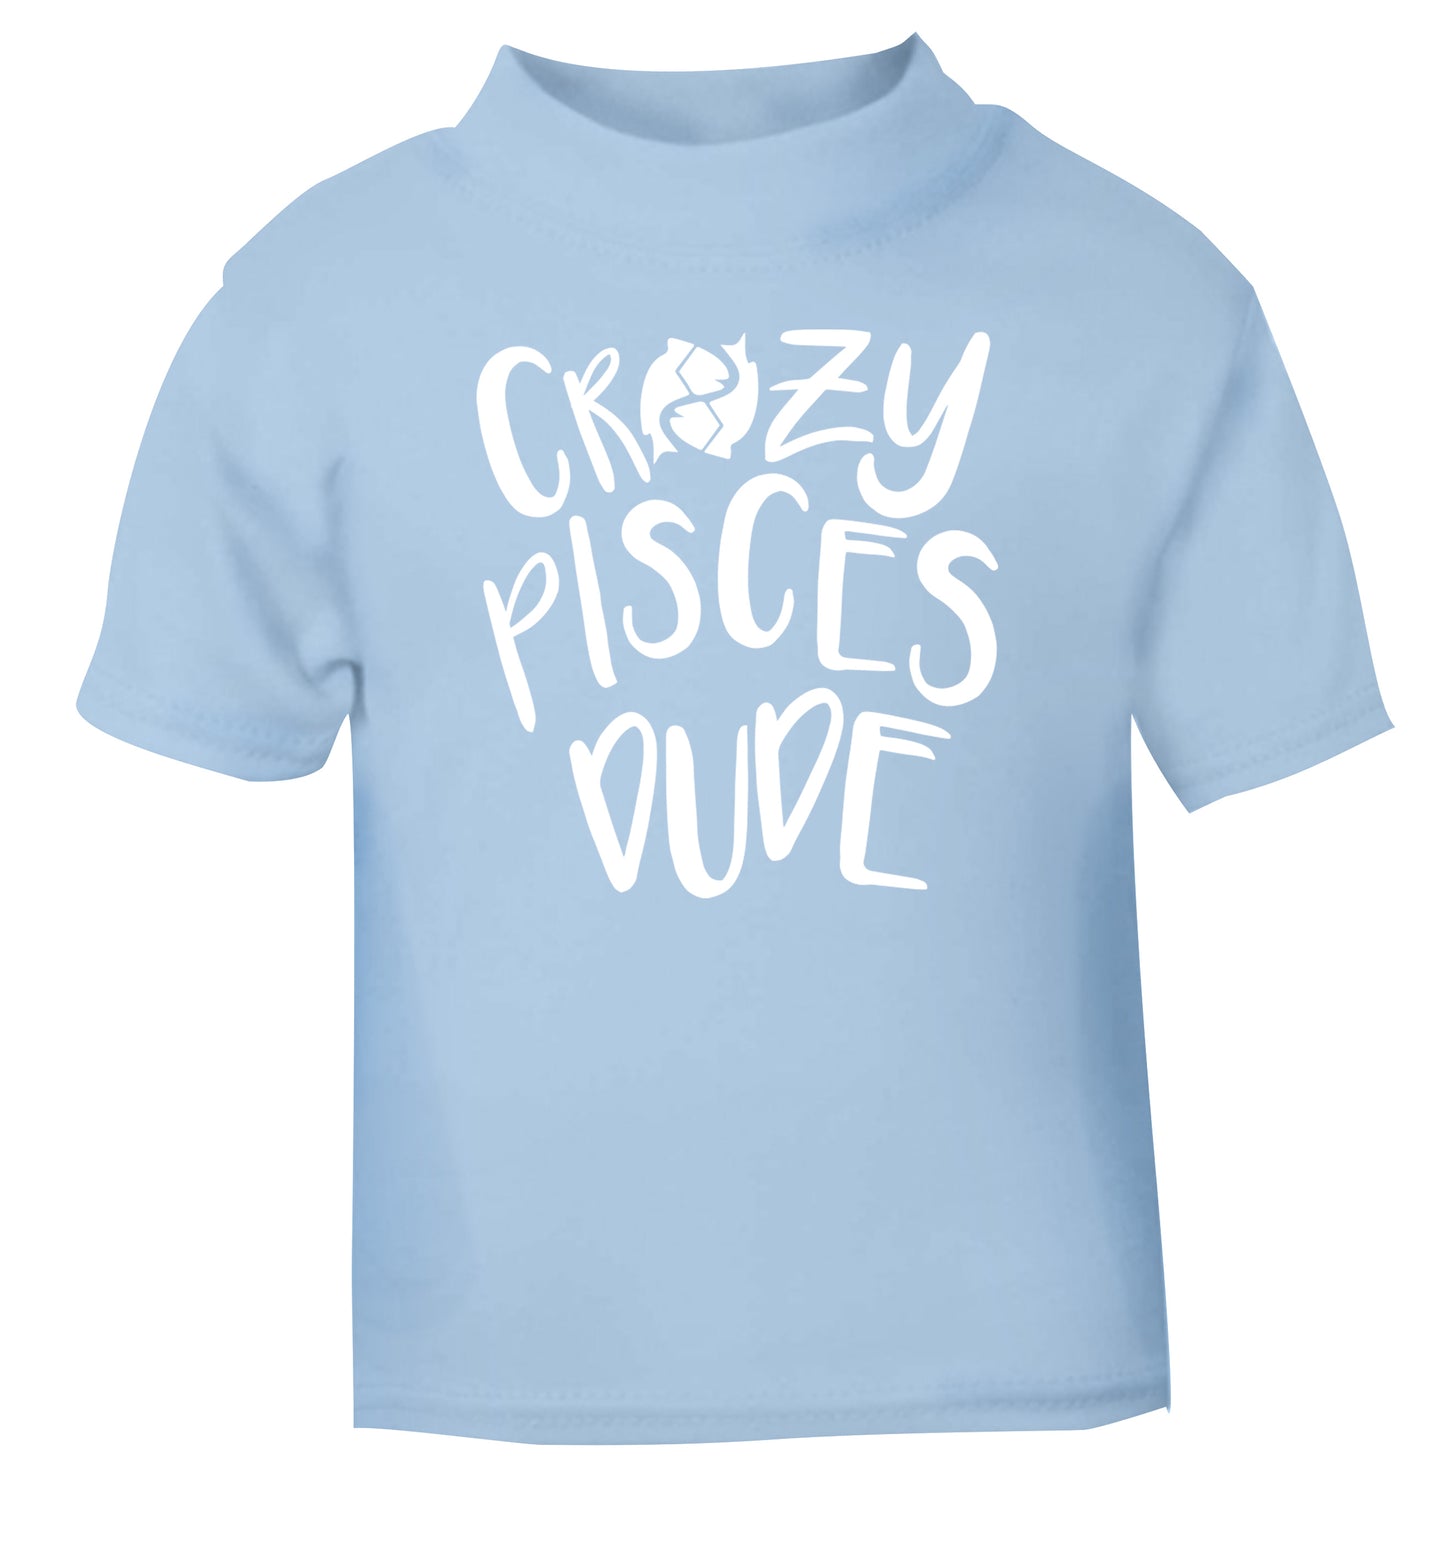 Crazy pisces dude light blue Baby Toddler Tshirt 2 Years